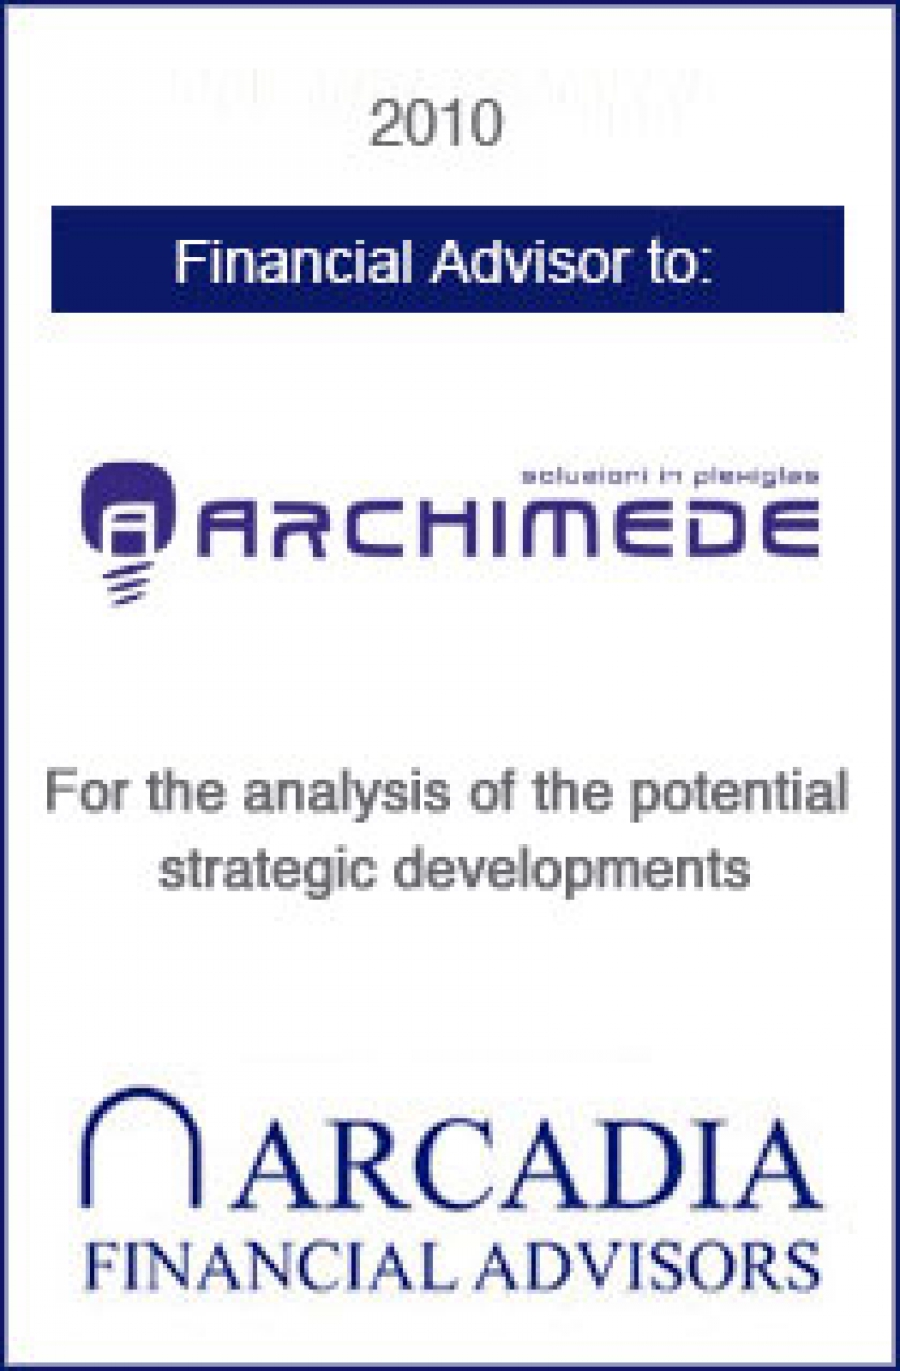 Transaction completed with Archimede